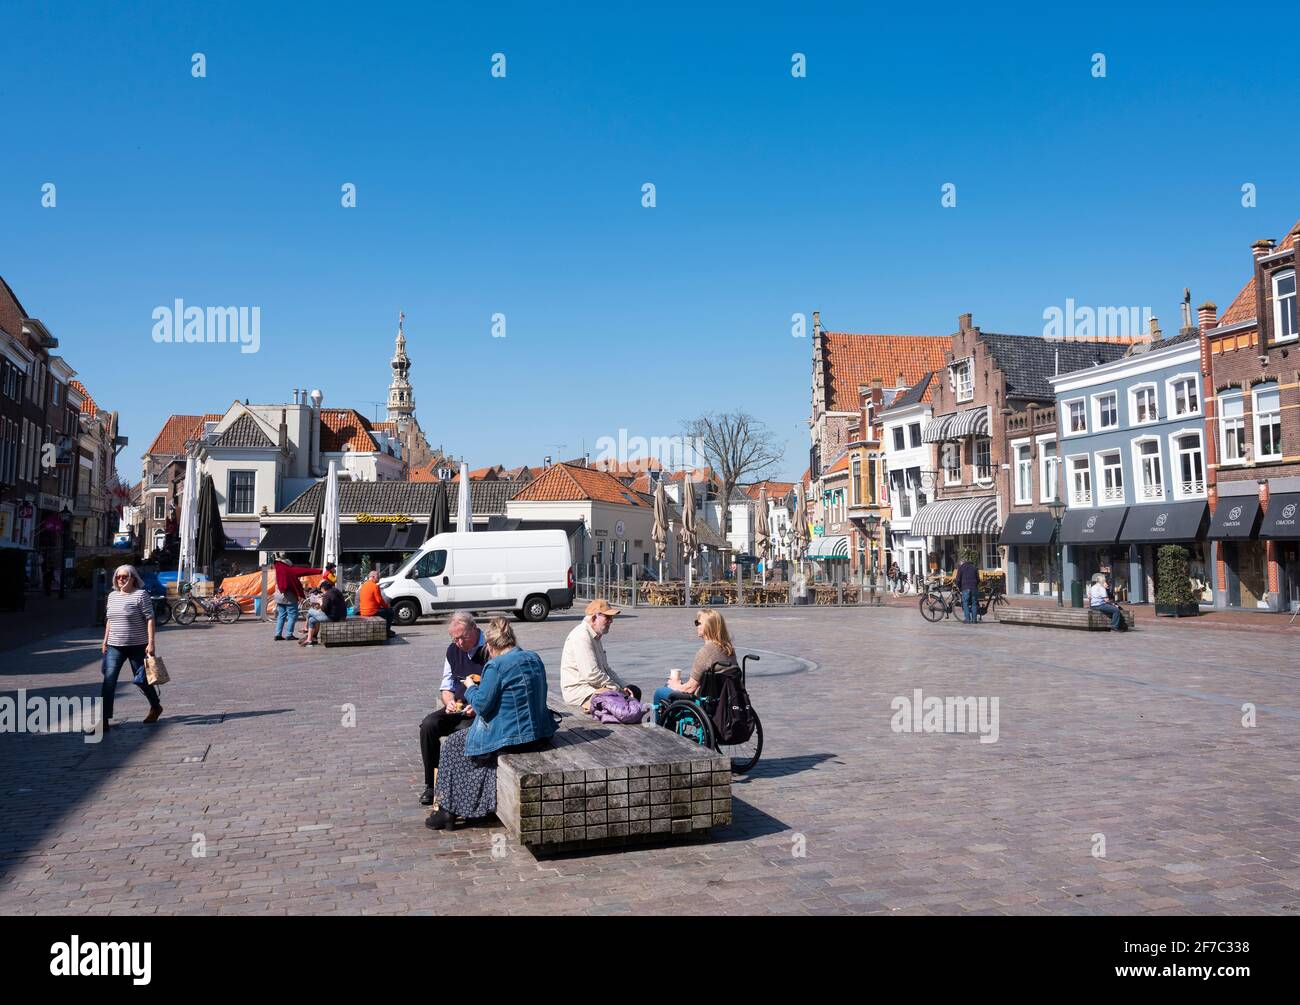 people enjoy sunshine on old square in dutch town of zierikzee in spring Stock Photo